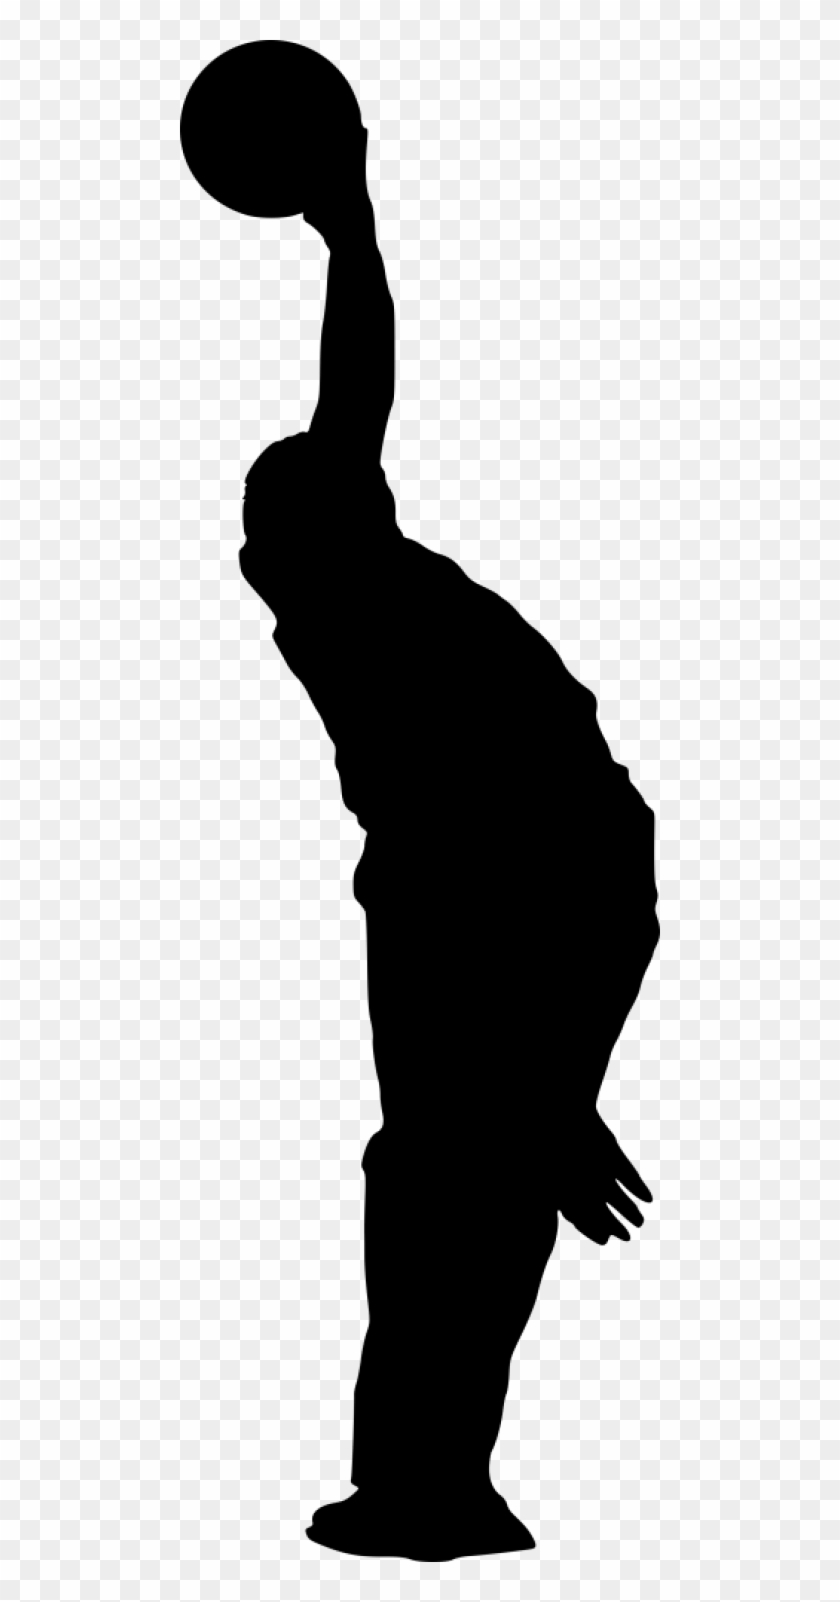 Sport Bowling Silhouette Png - Sport Bowling #386619